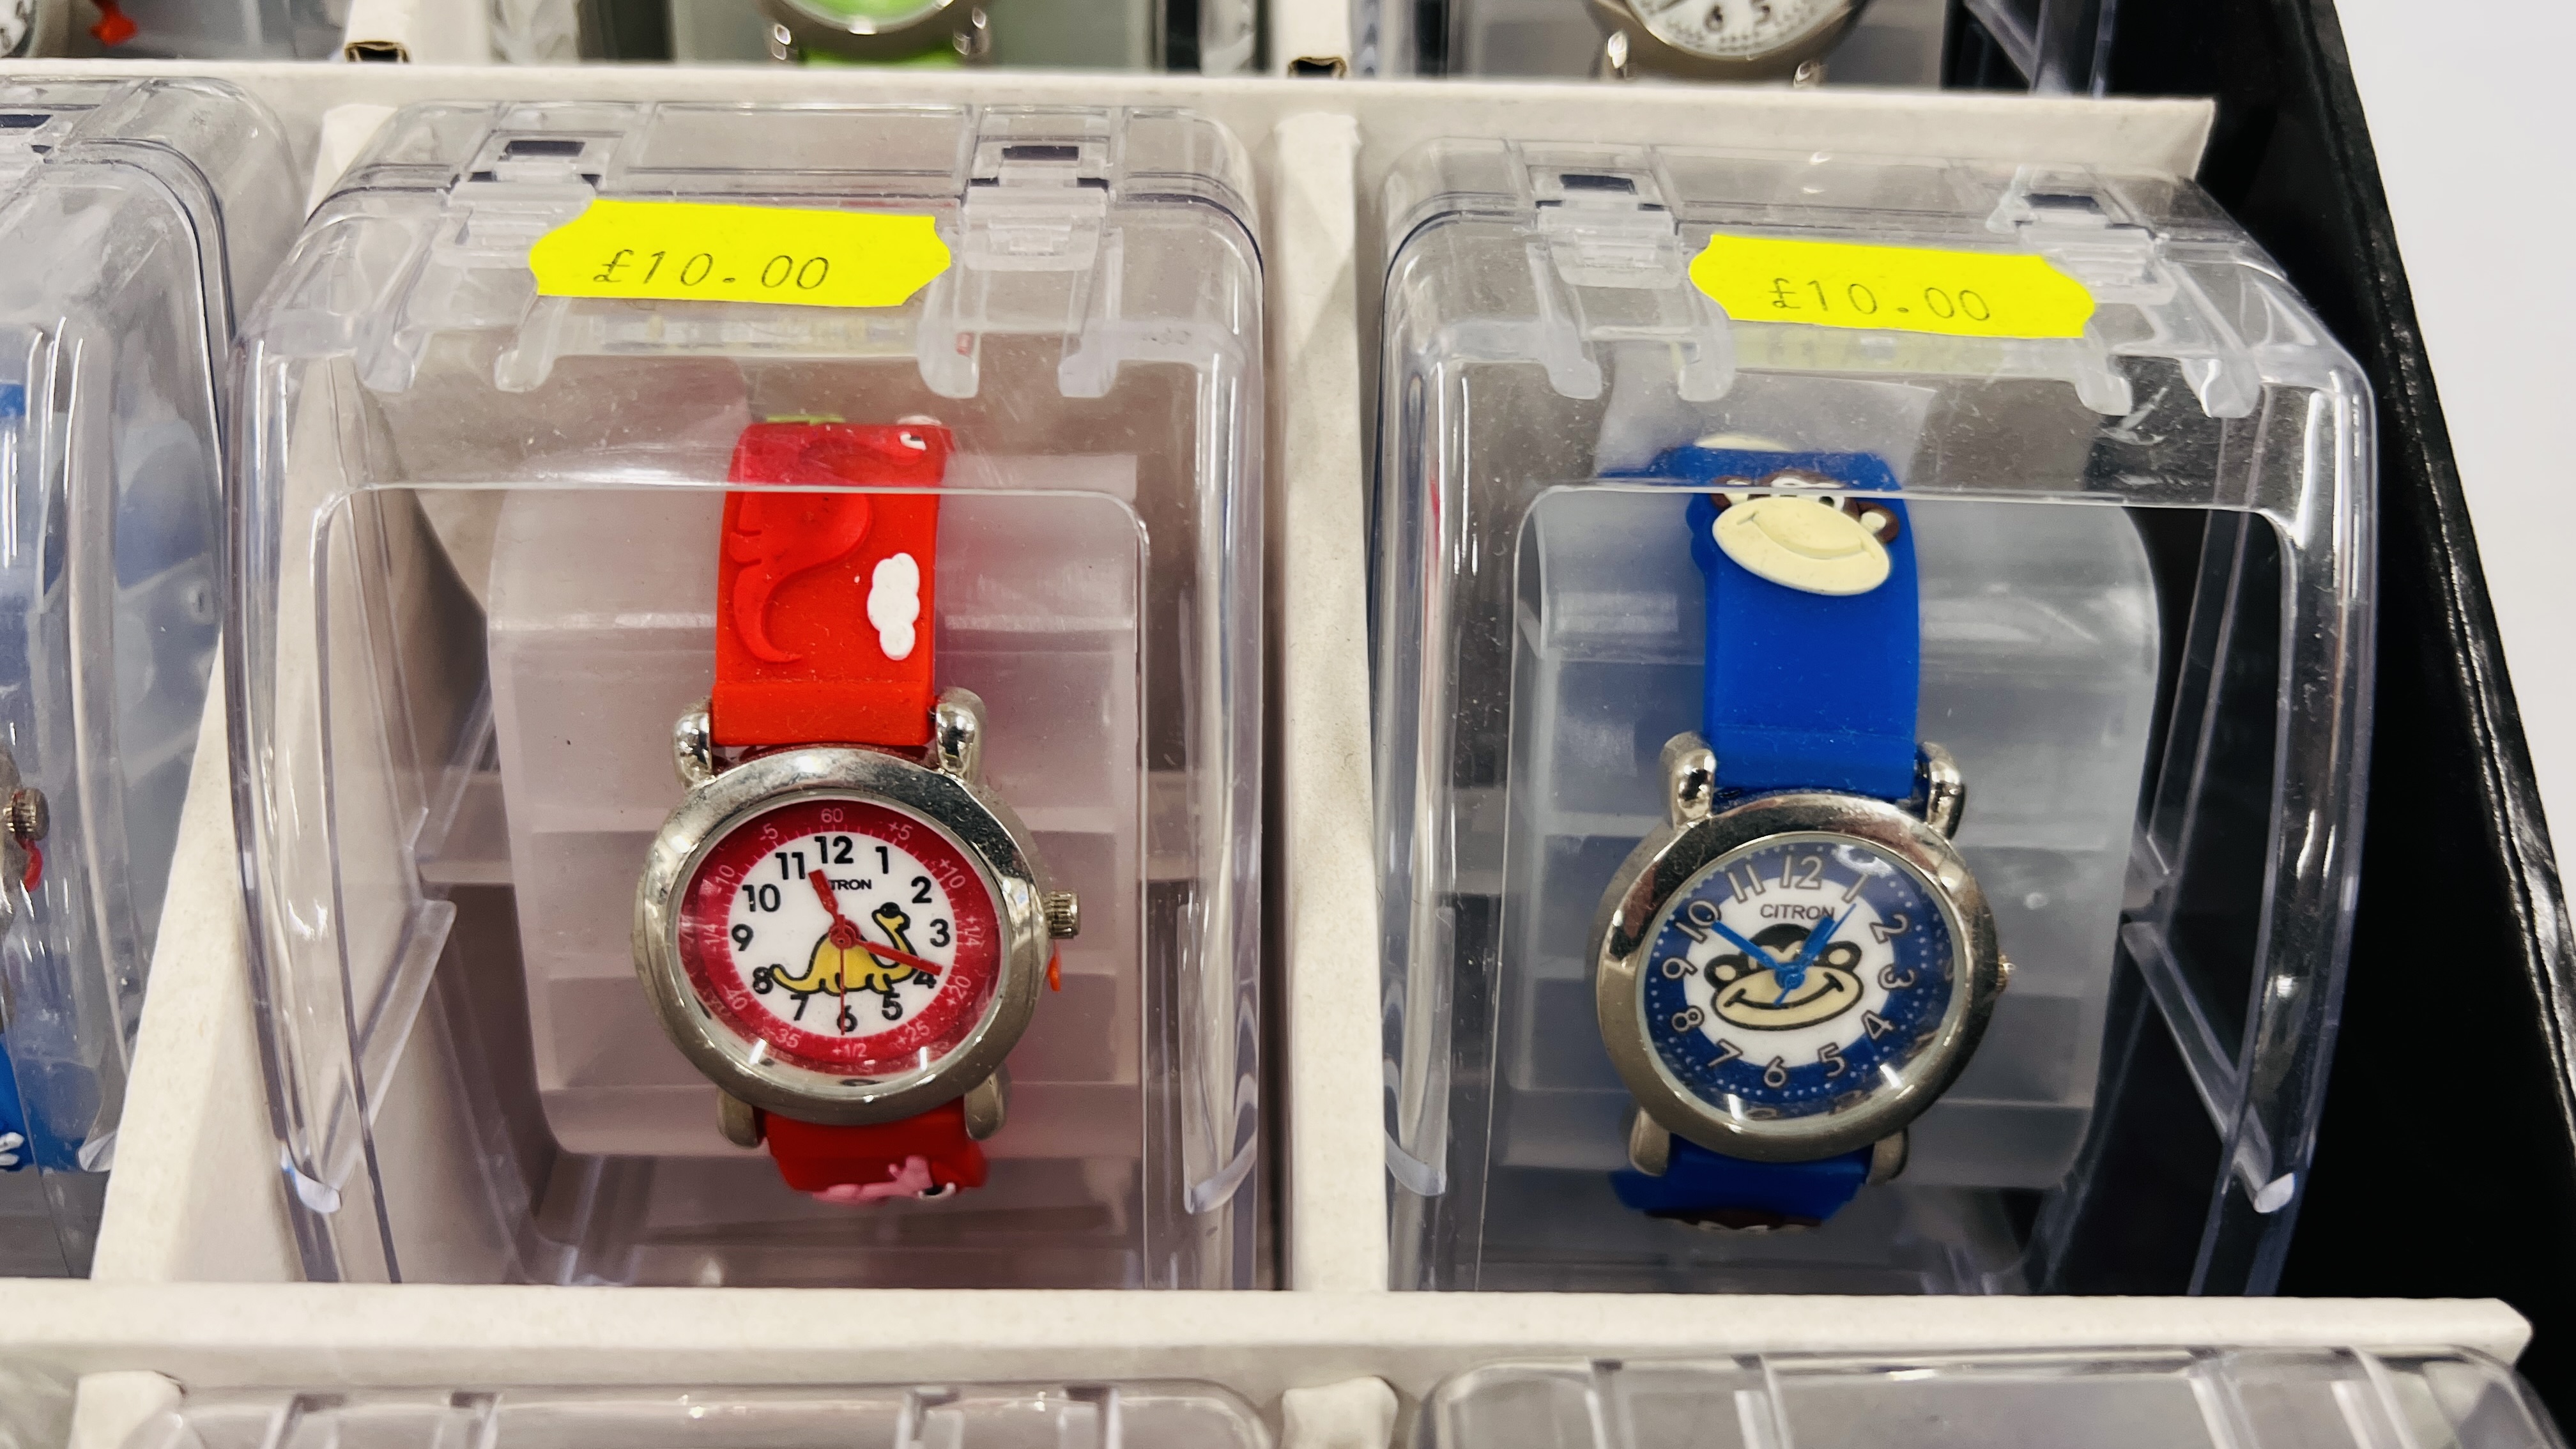 BANKRUPTCY STOCK - 12 X BOXED CITRON CHILDREN'S WRIST WATCHES VARIOUS DESIGNS. - Image 4 of 7